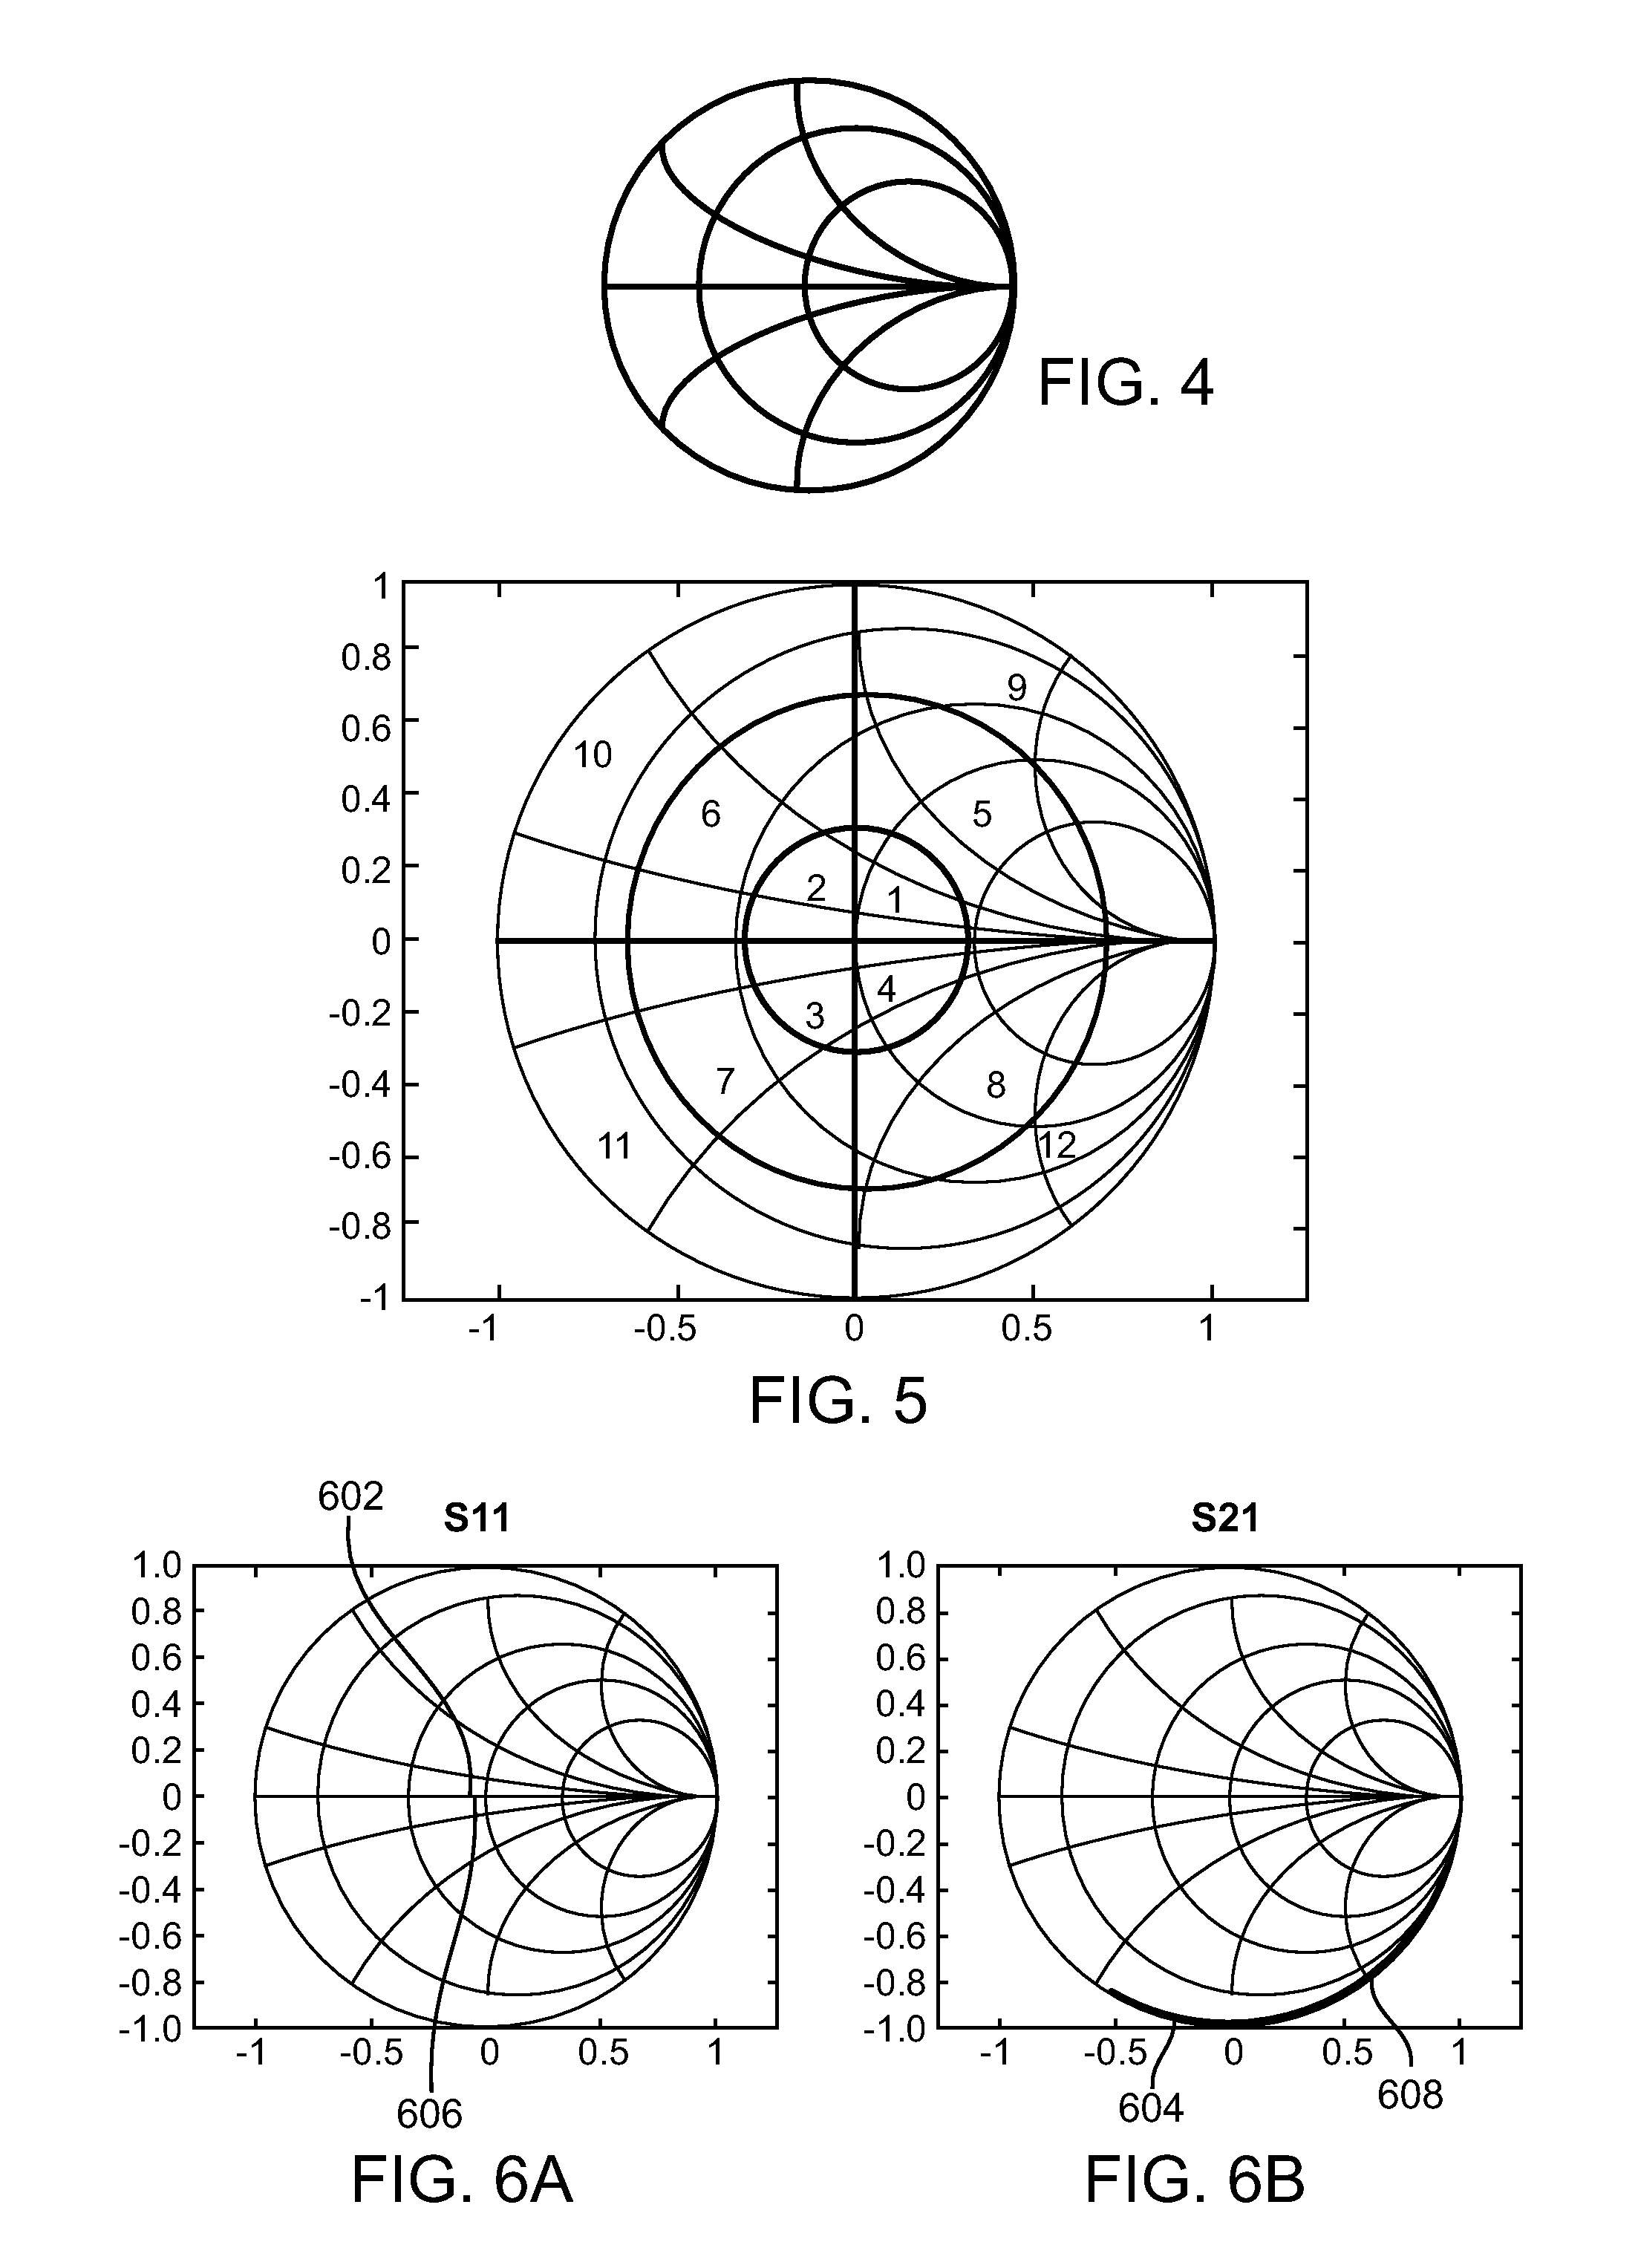 Use of smith chart to compensate for missing data on network performance at lower frequency